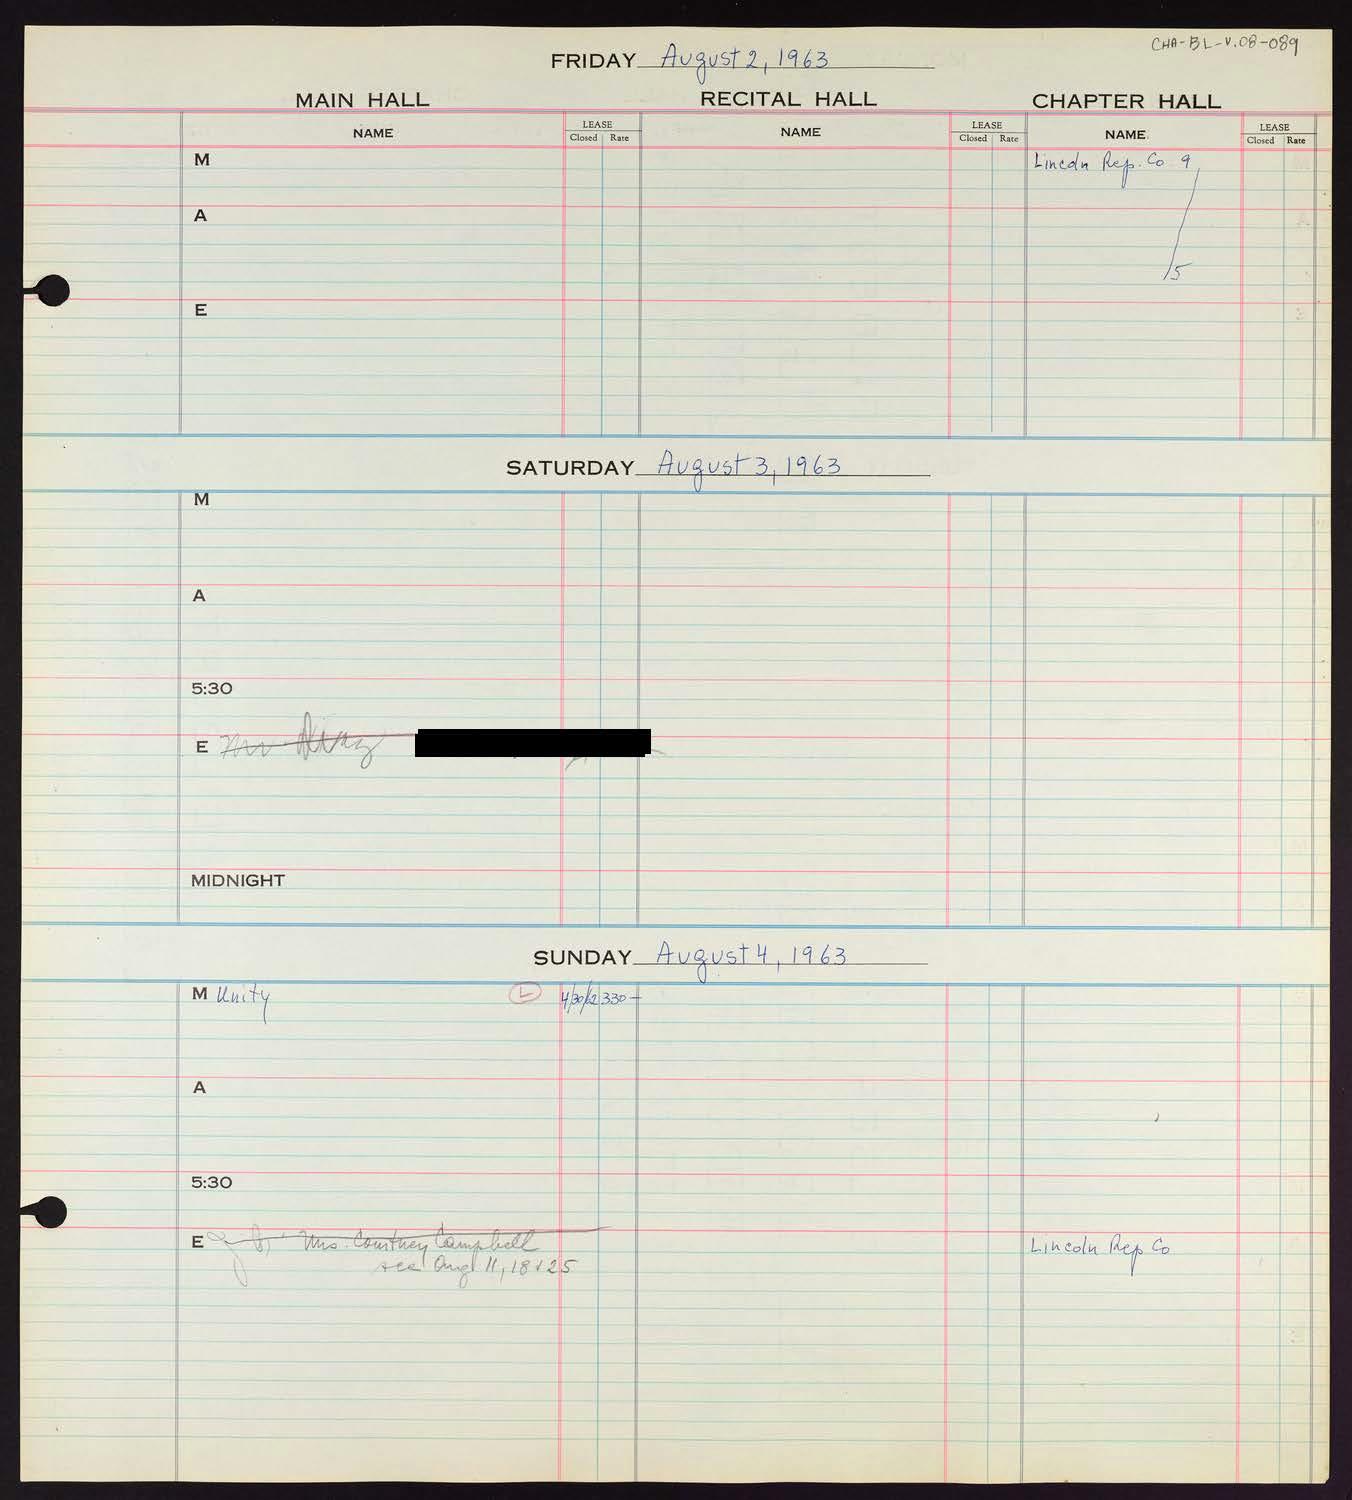 Carnegie Hall Booking Ledger, volume 8, page 89